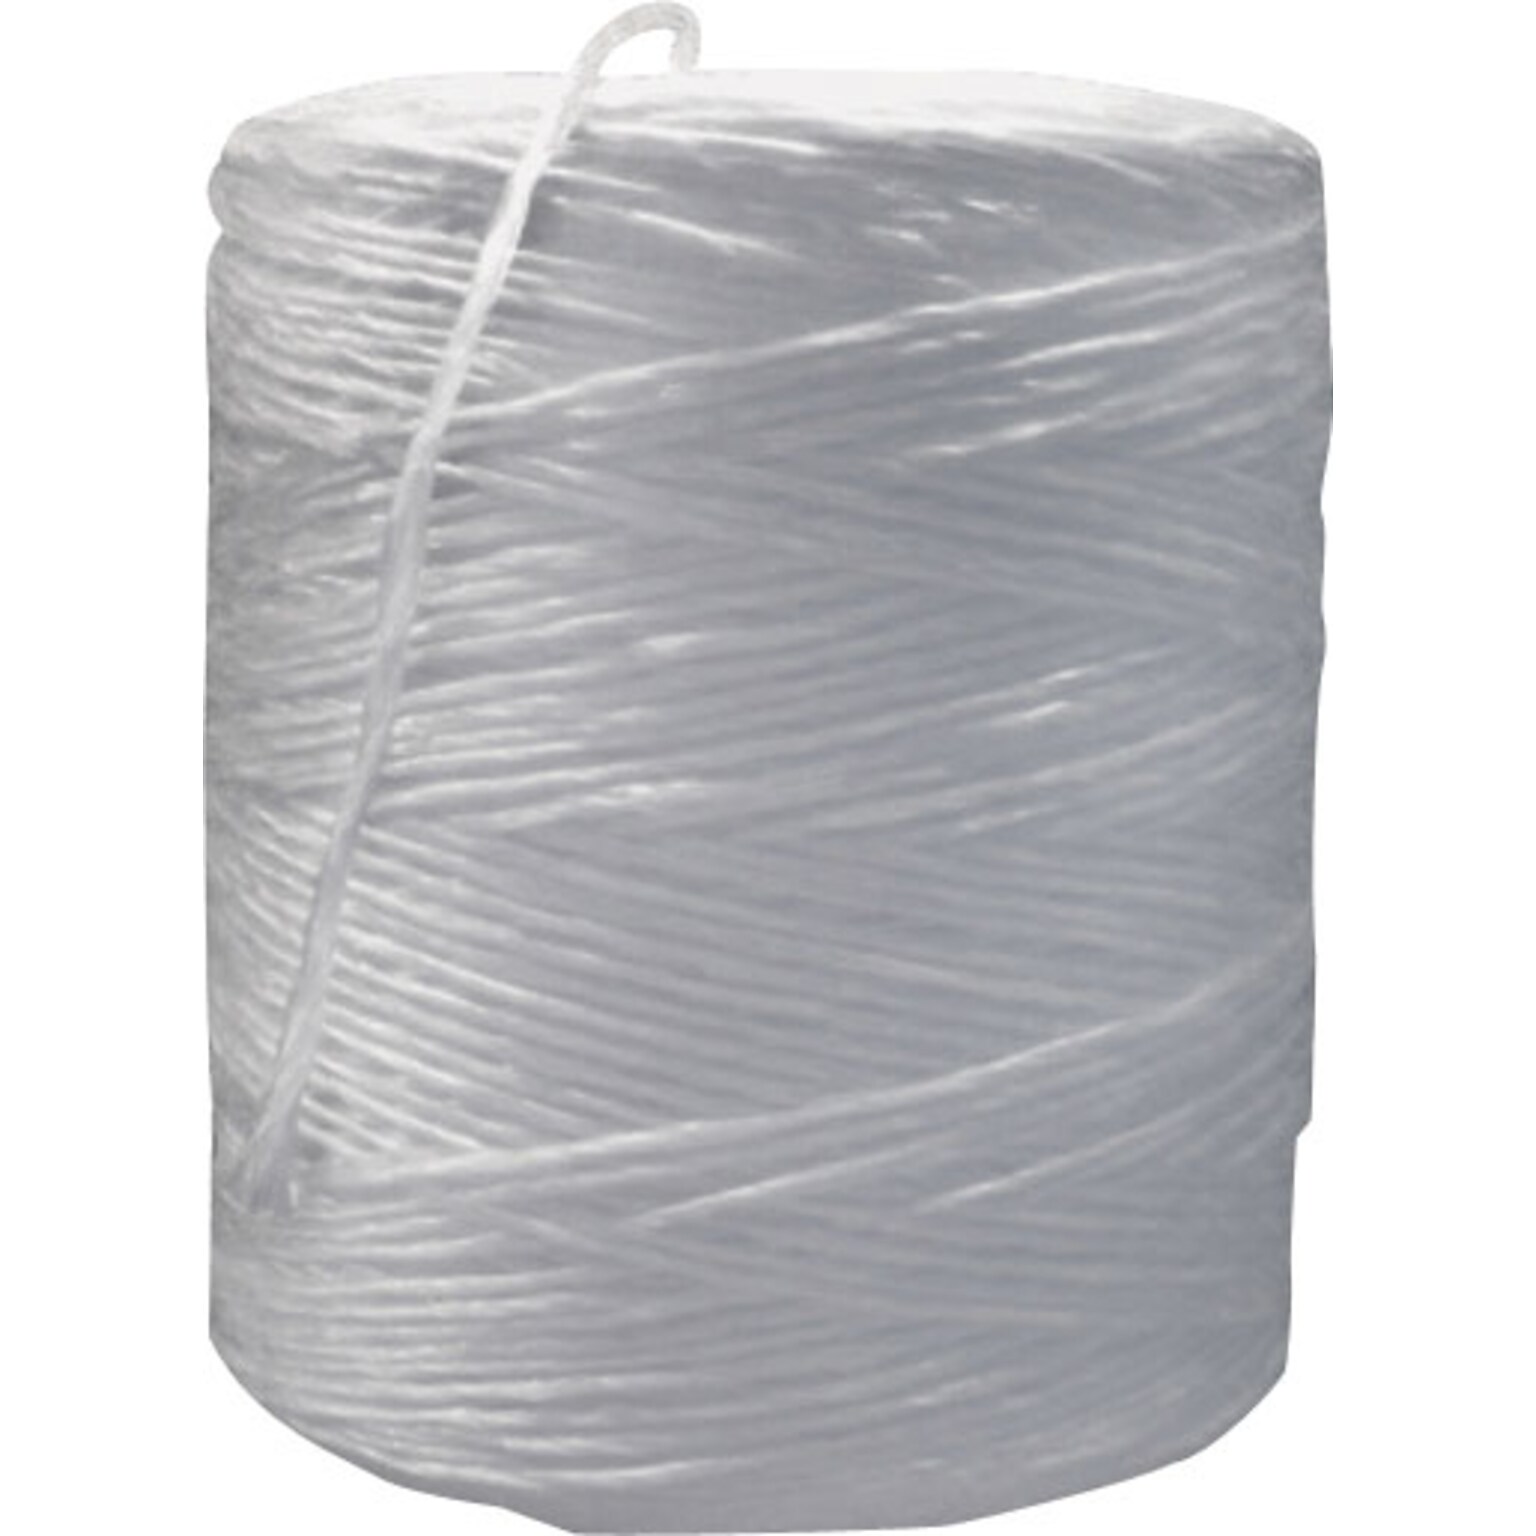 Tying Twine; 1-Ply, 5500, 210-lb. Tensile Strength